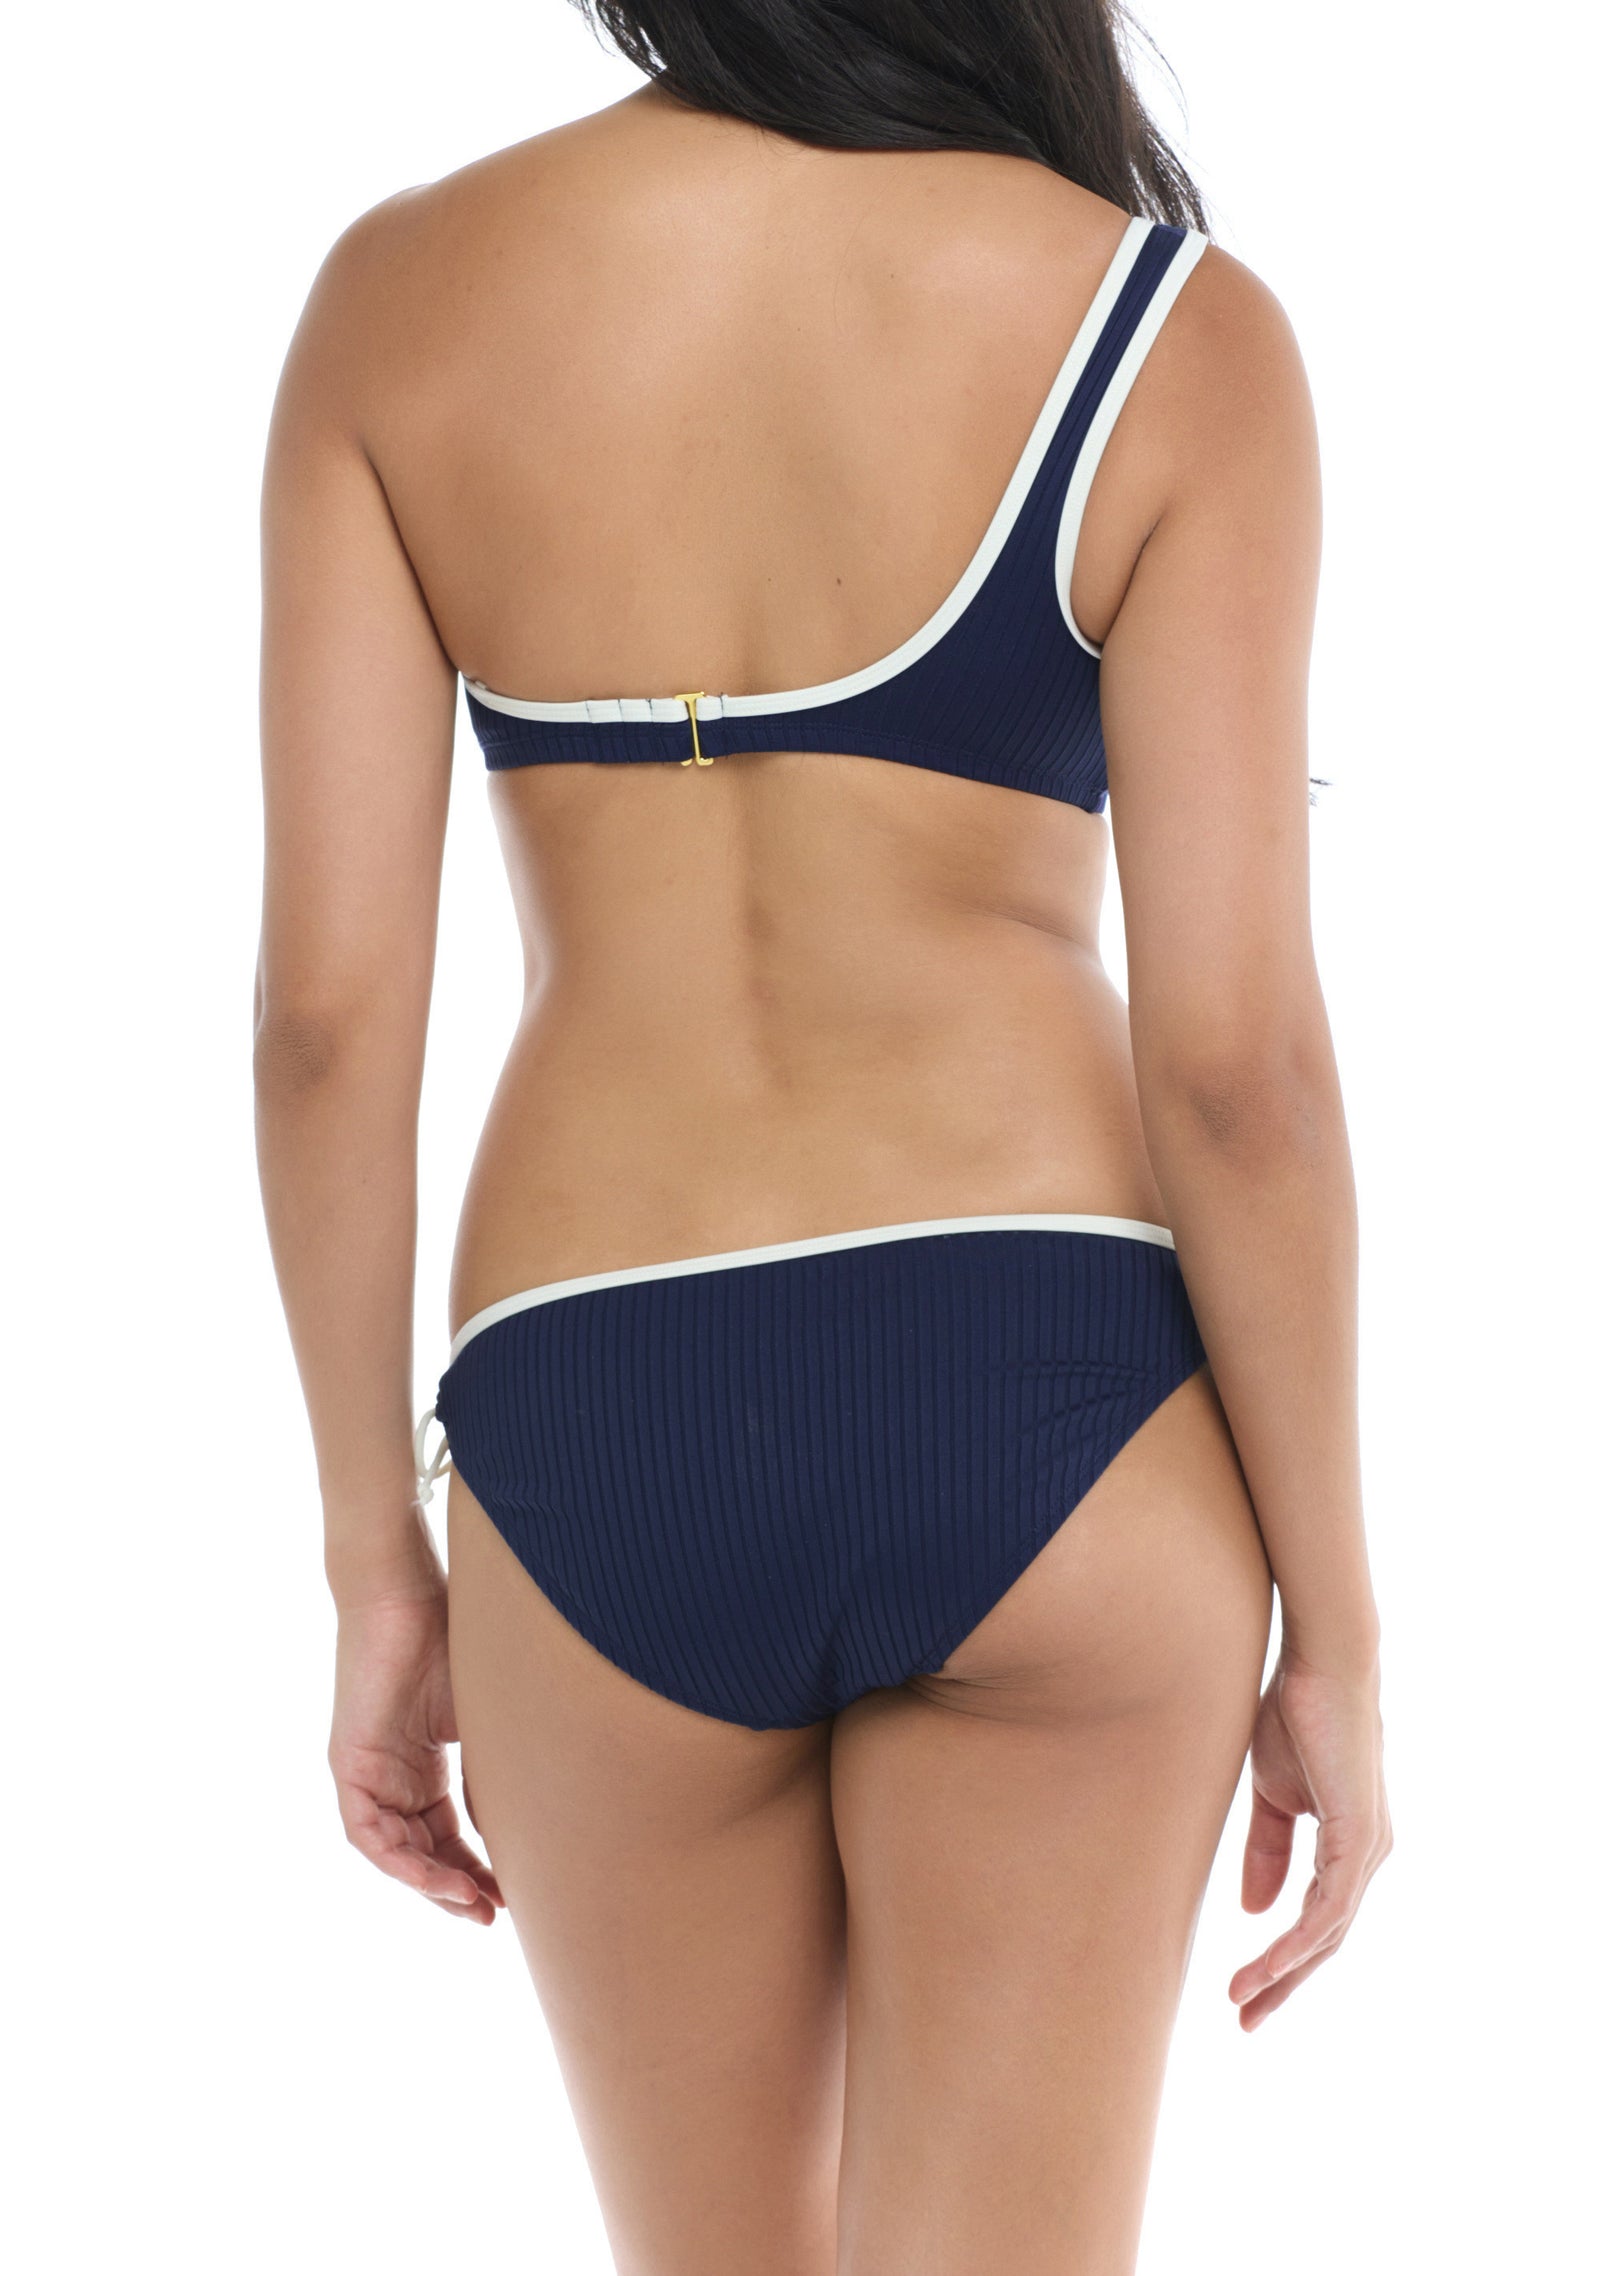 MAU LOA COLLECTION: JULIANA  Low Rise, Clean Finish Front, Adjustable Front Loops, Ribbed Fabric, Full Coverage  Product#: SK736148